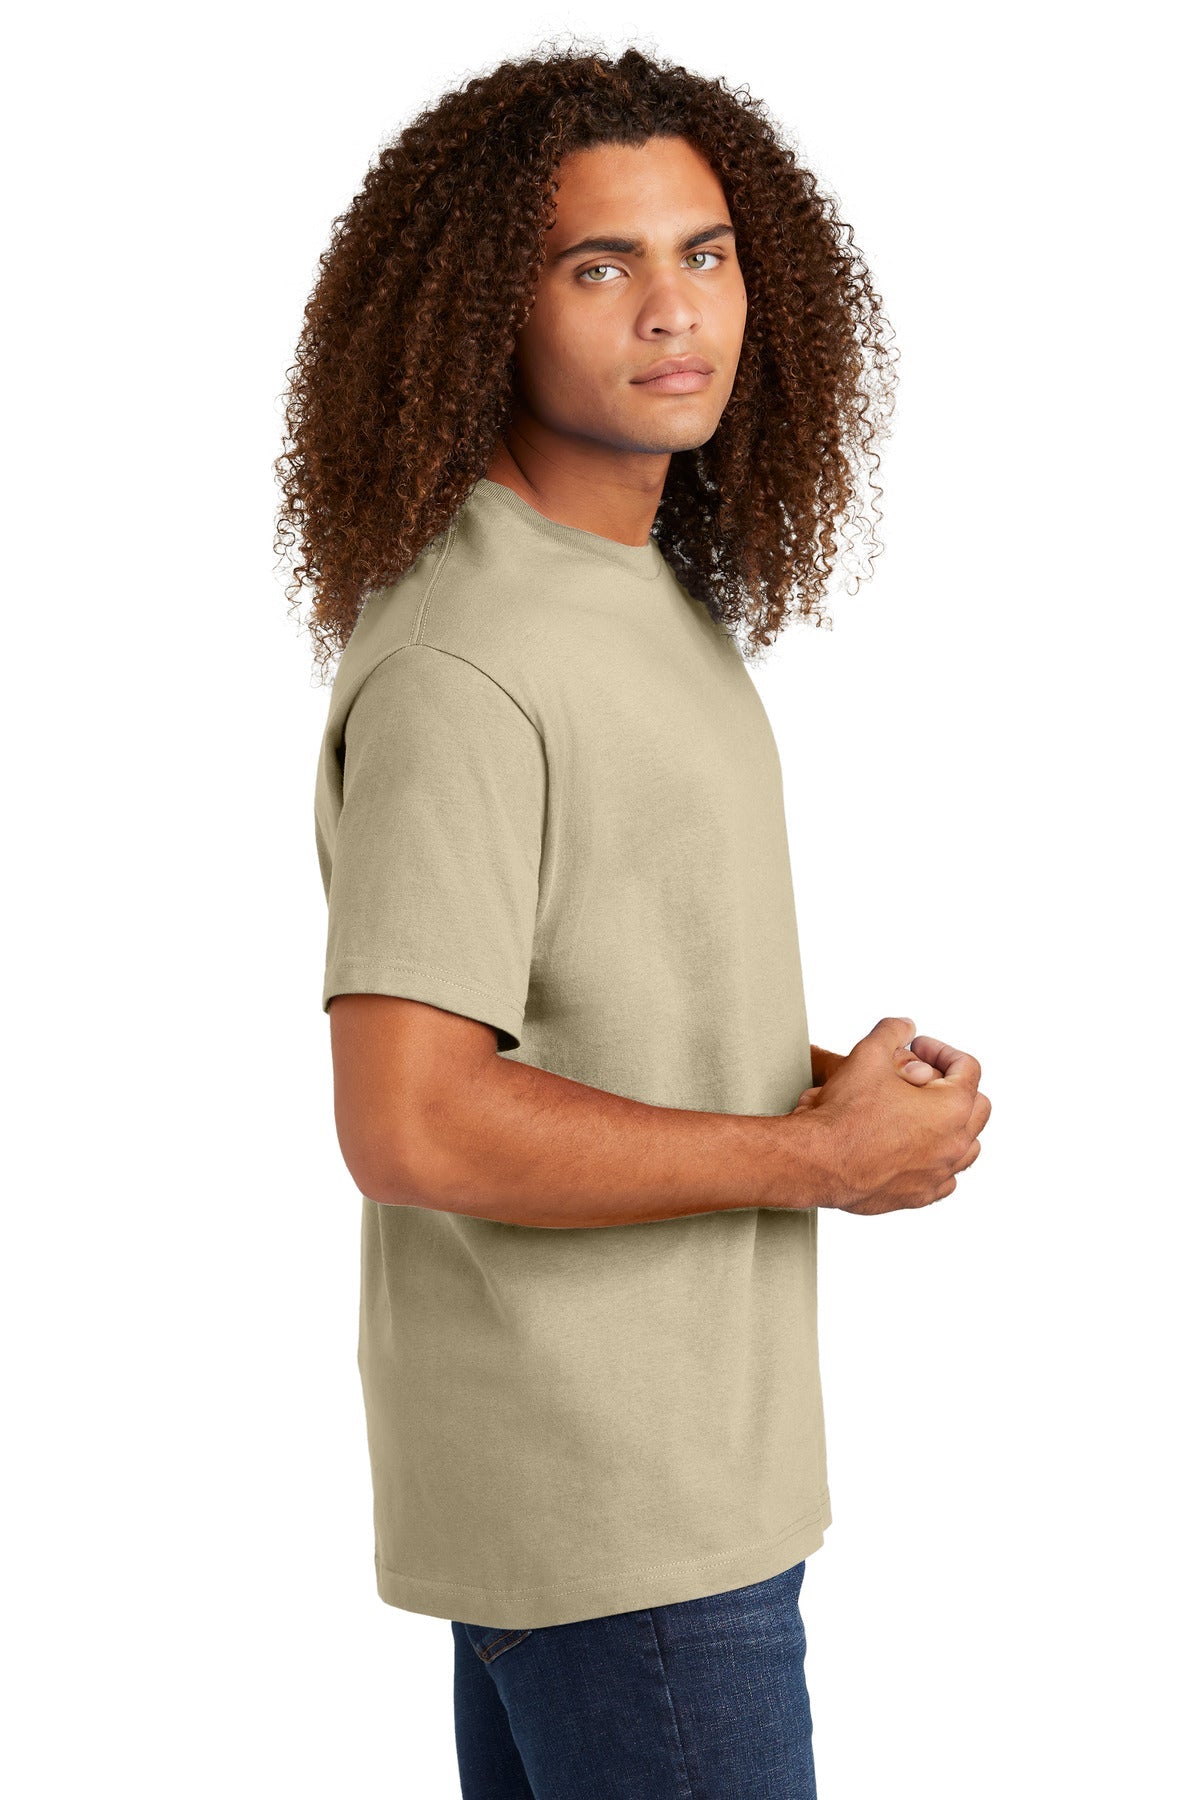 American Apparel® Relaxed T-Shirt 1301W [Sand] - DFW Impression